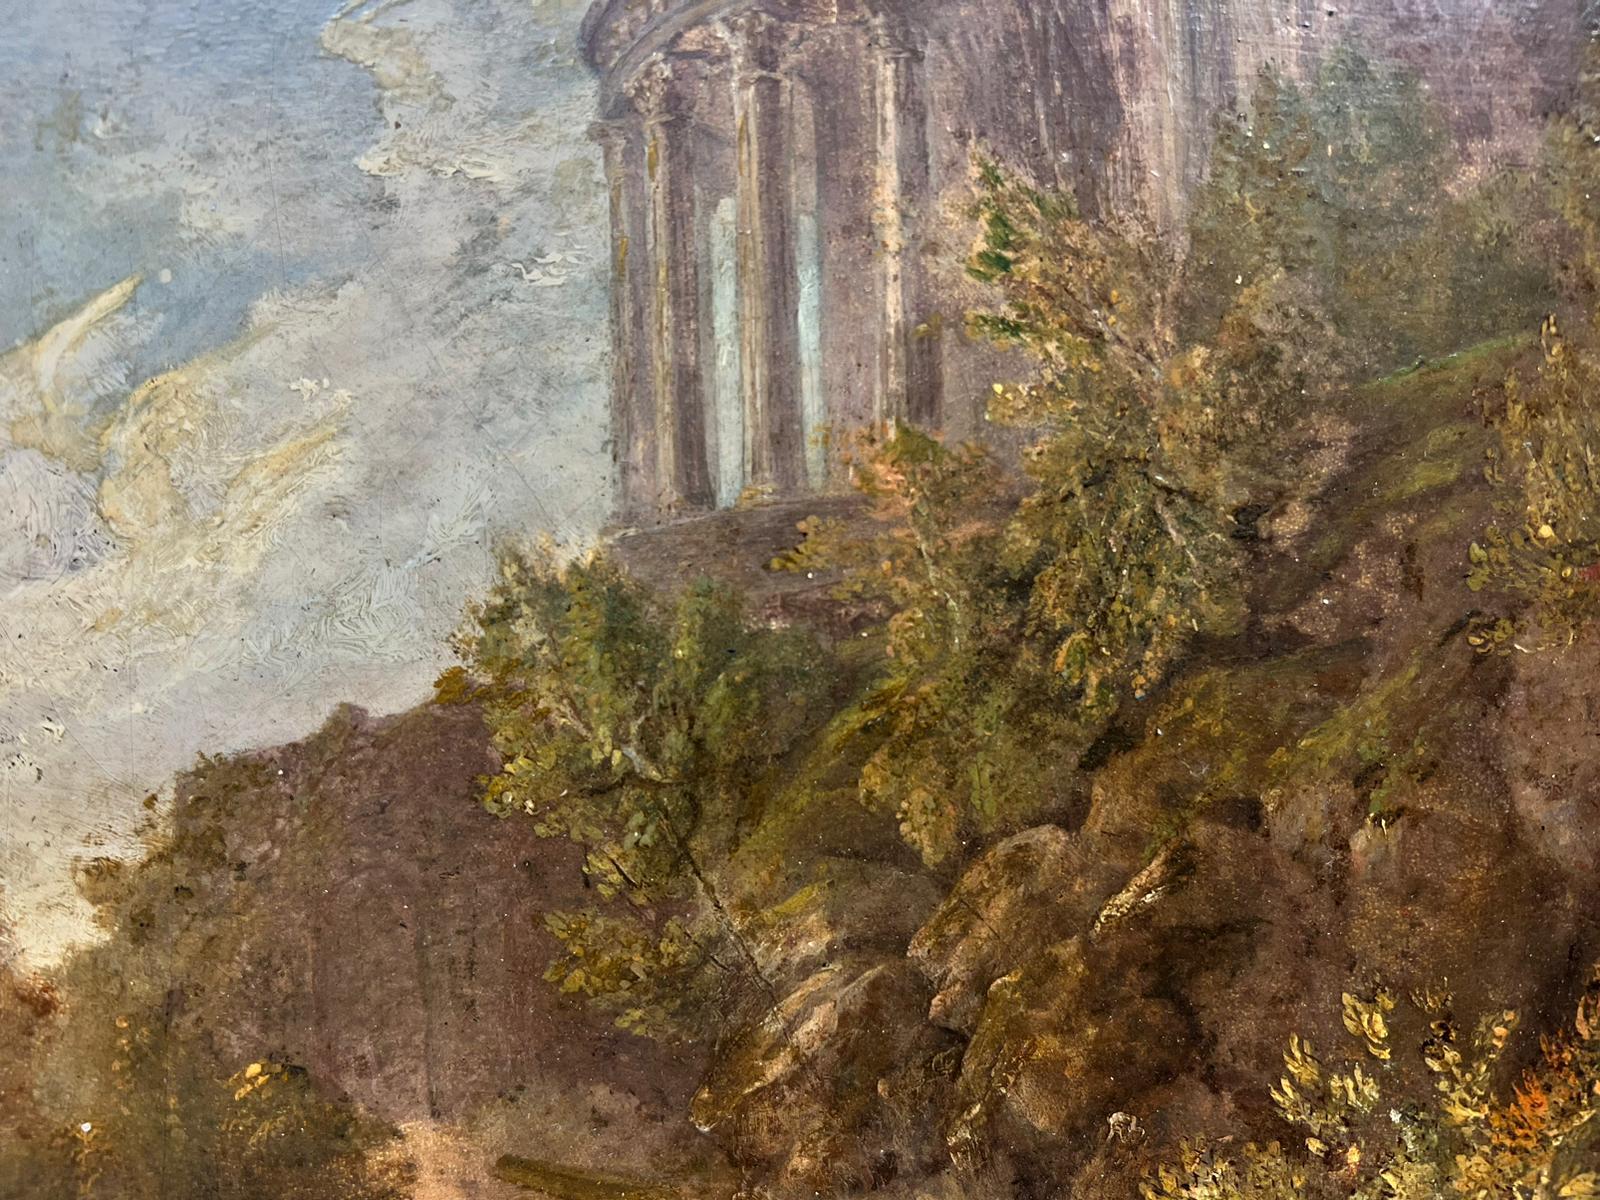 Artist/ School: English School (19th Century), inscribed verso

Title: The Temple of Vista at Tivoli. 

Medium: oil on artists board, framed

Framed: 13 x 16 inches
Painting: 9 x 12.5 inches

Provenance: private collection, UK

Condition: The